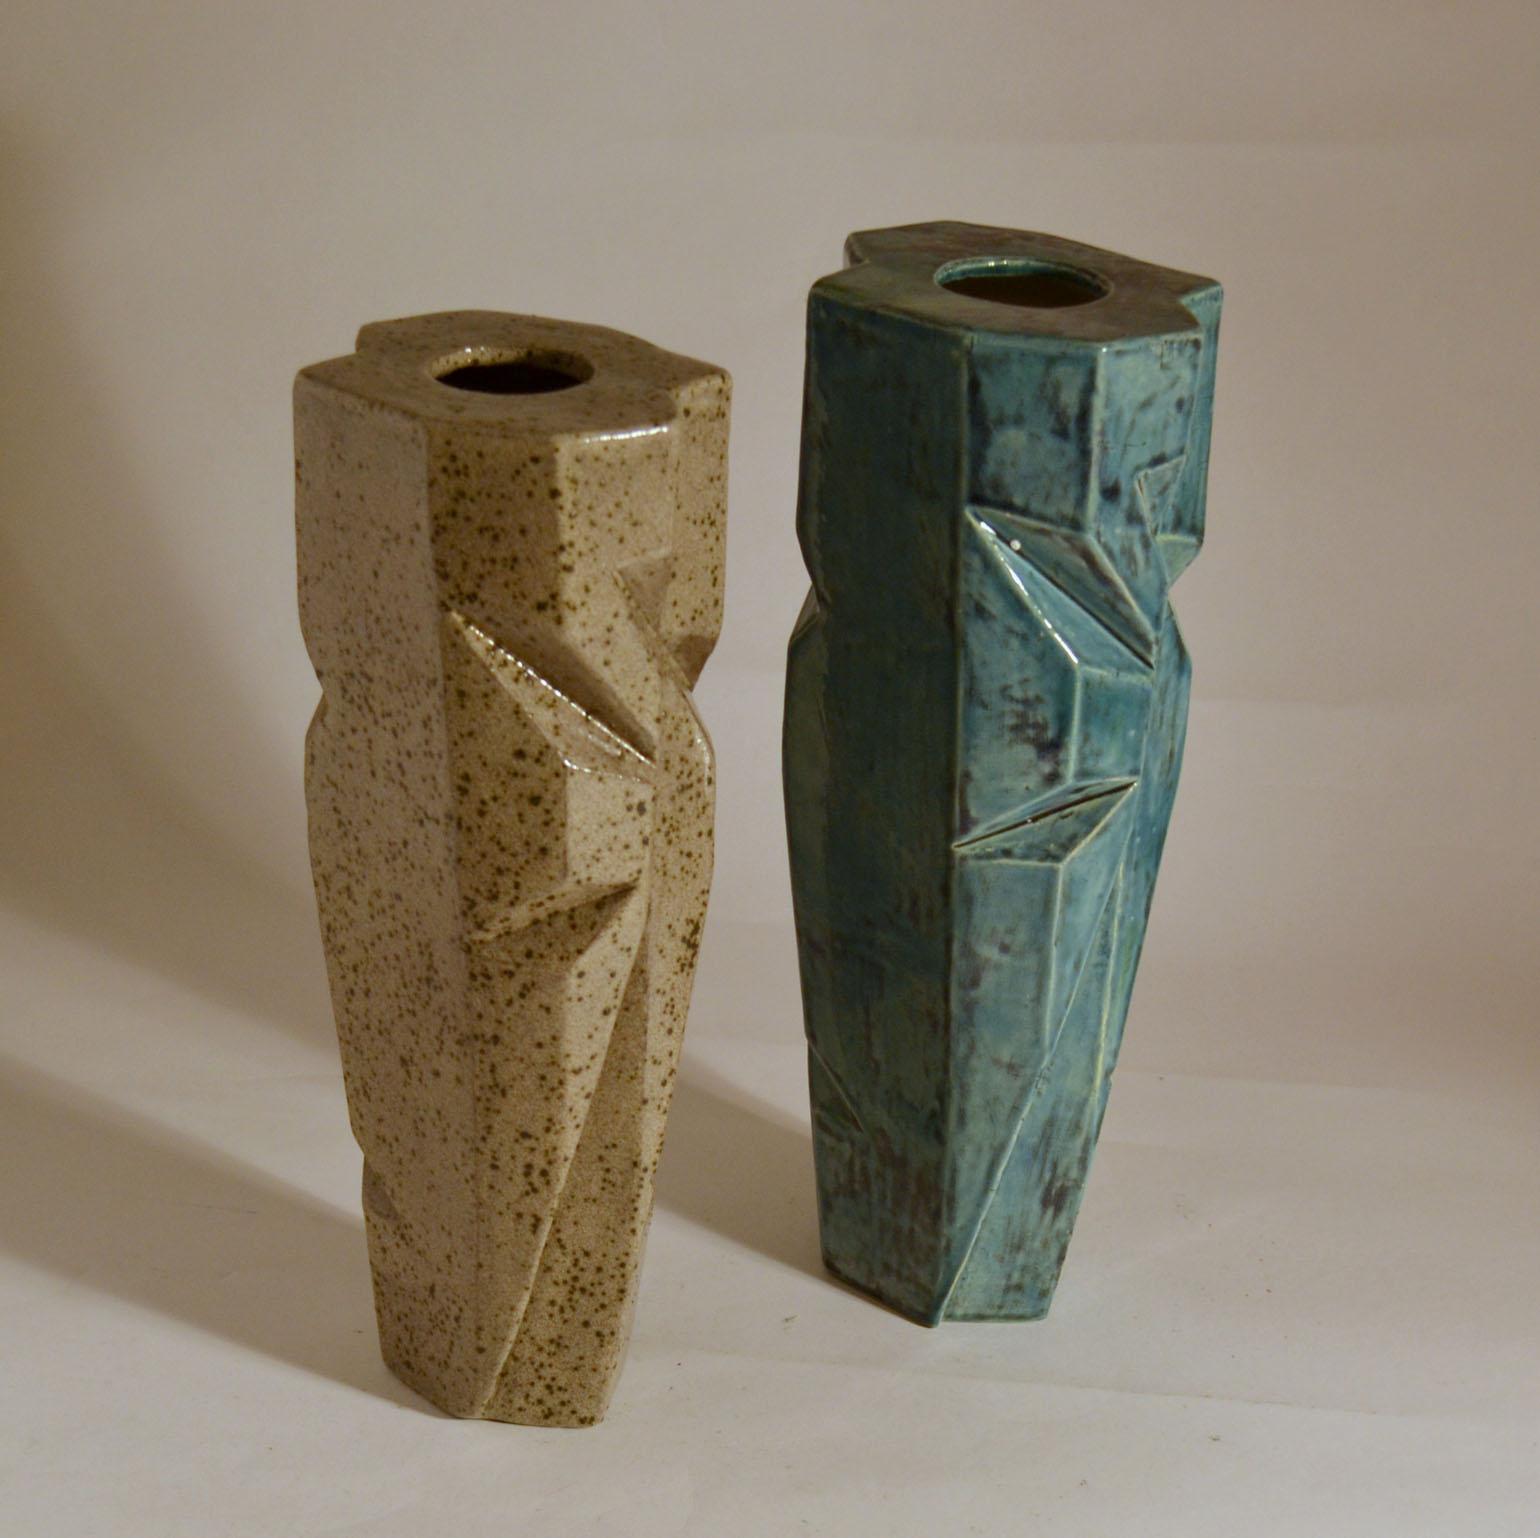 Hand formed elongated studio pottery vases in angular form with sharp incisions made in limited edition, signed by Dutch H. Naus.
Each vase is slightly different and in different glaze and height.
Blue vase height 35.5 cm
Sand color vase height